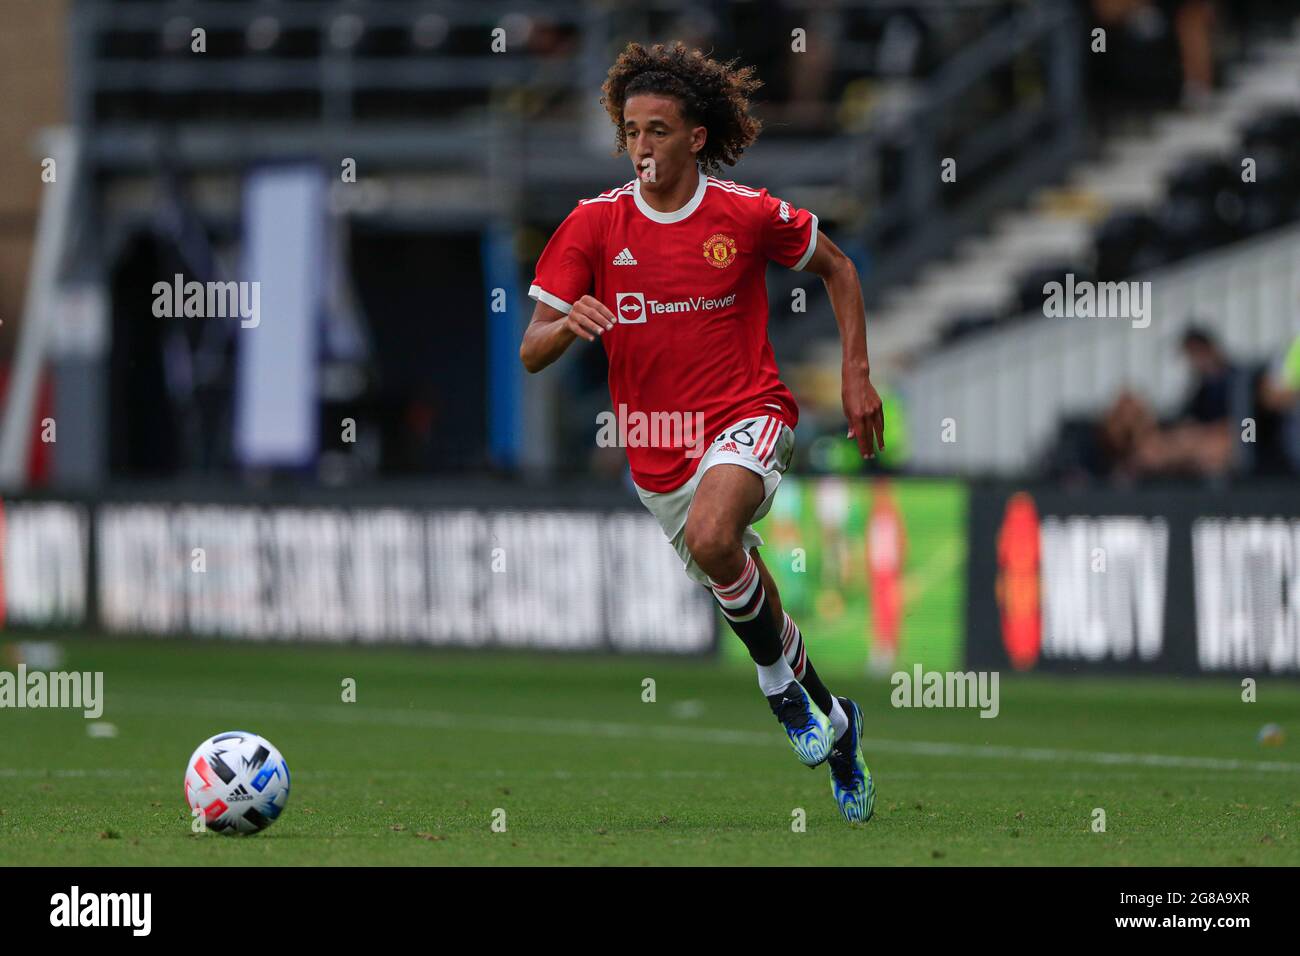 Hannibal Mejbri #46 of Manchester United runs with the ball Stock Photo